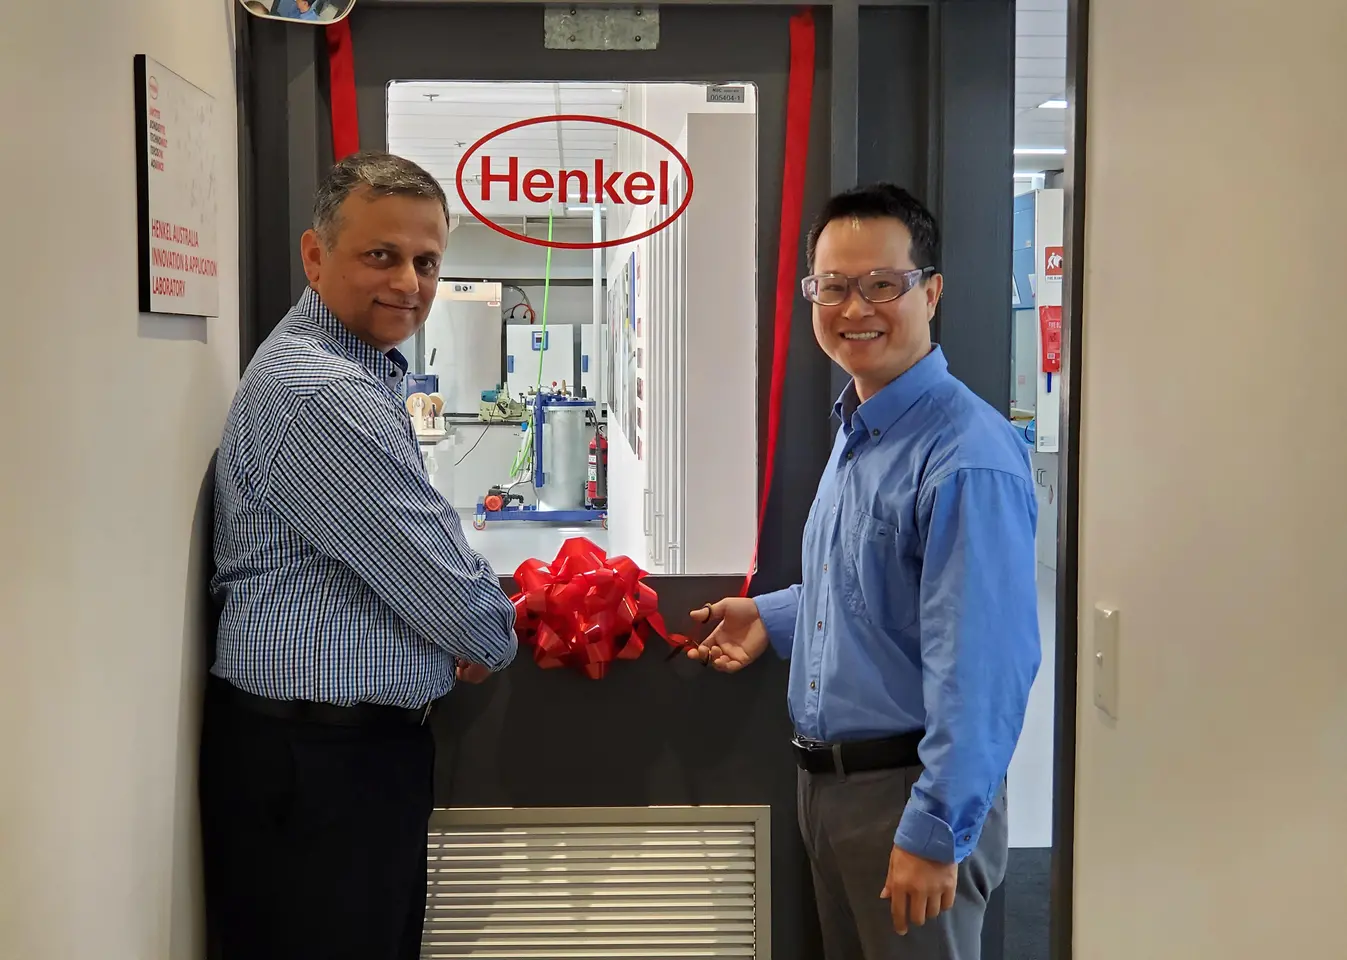 Aamir Qureshi (left), Operations & Supply Chain Manager, and Stephen Liu (right), Senior Chemist, cutting the ribbon to mark the official opening of the upgraded Innovation and Application Lab of Henkel Adhesive Technologies in Sydney.